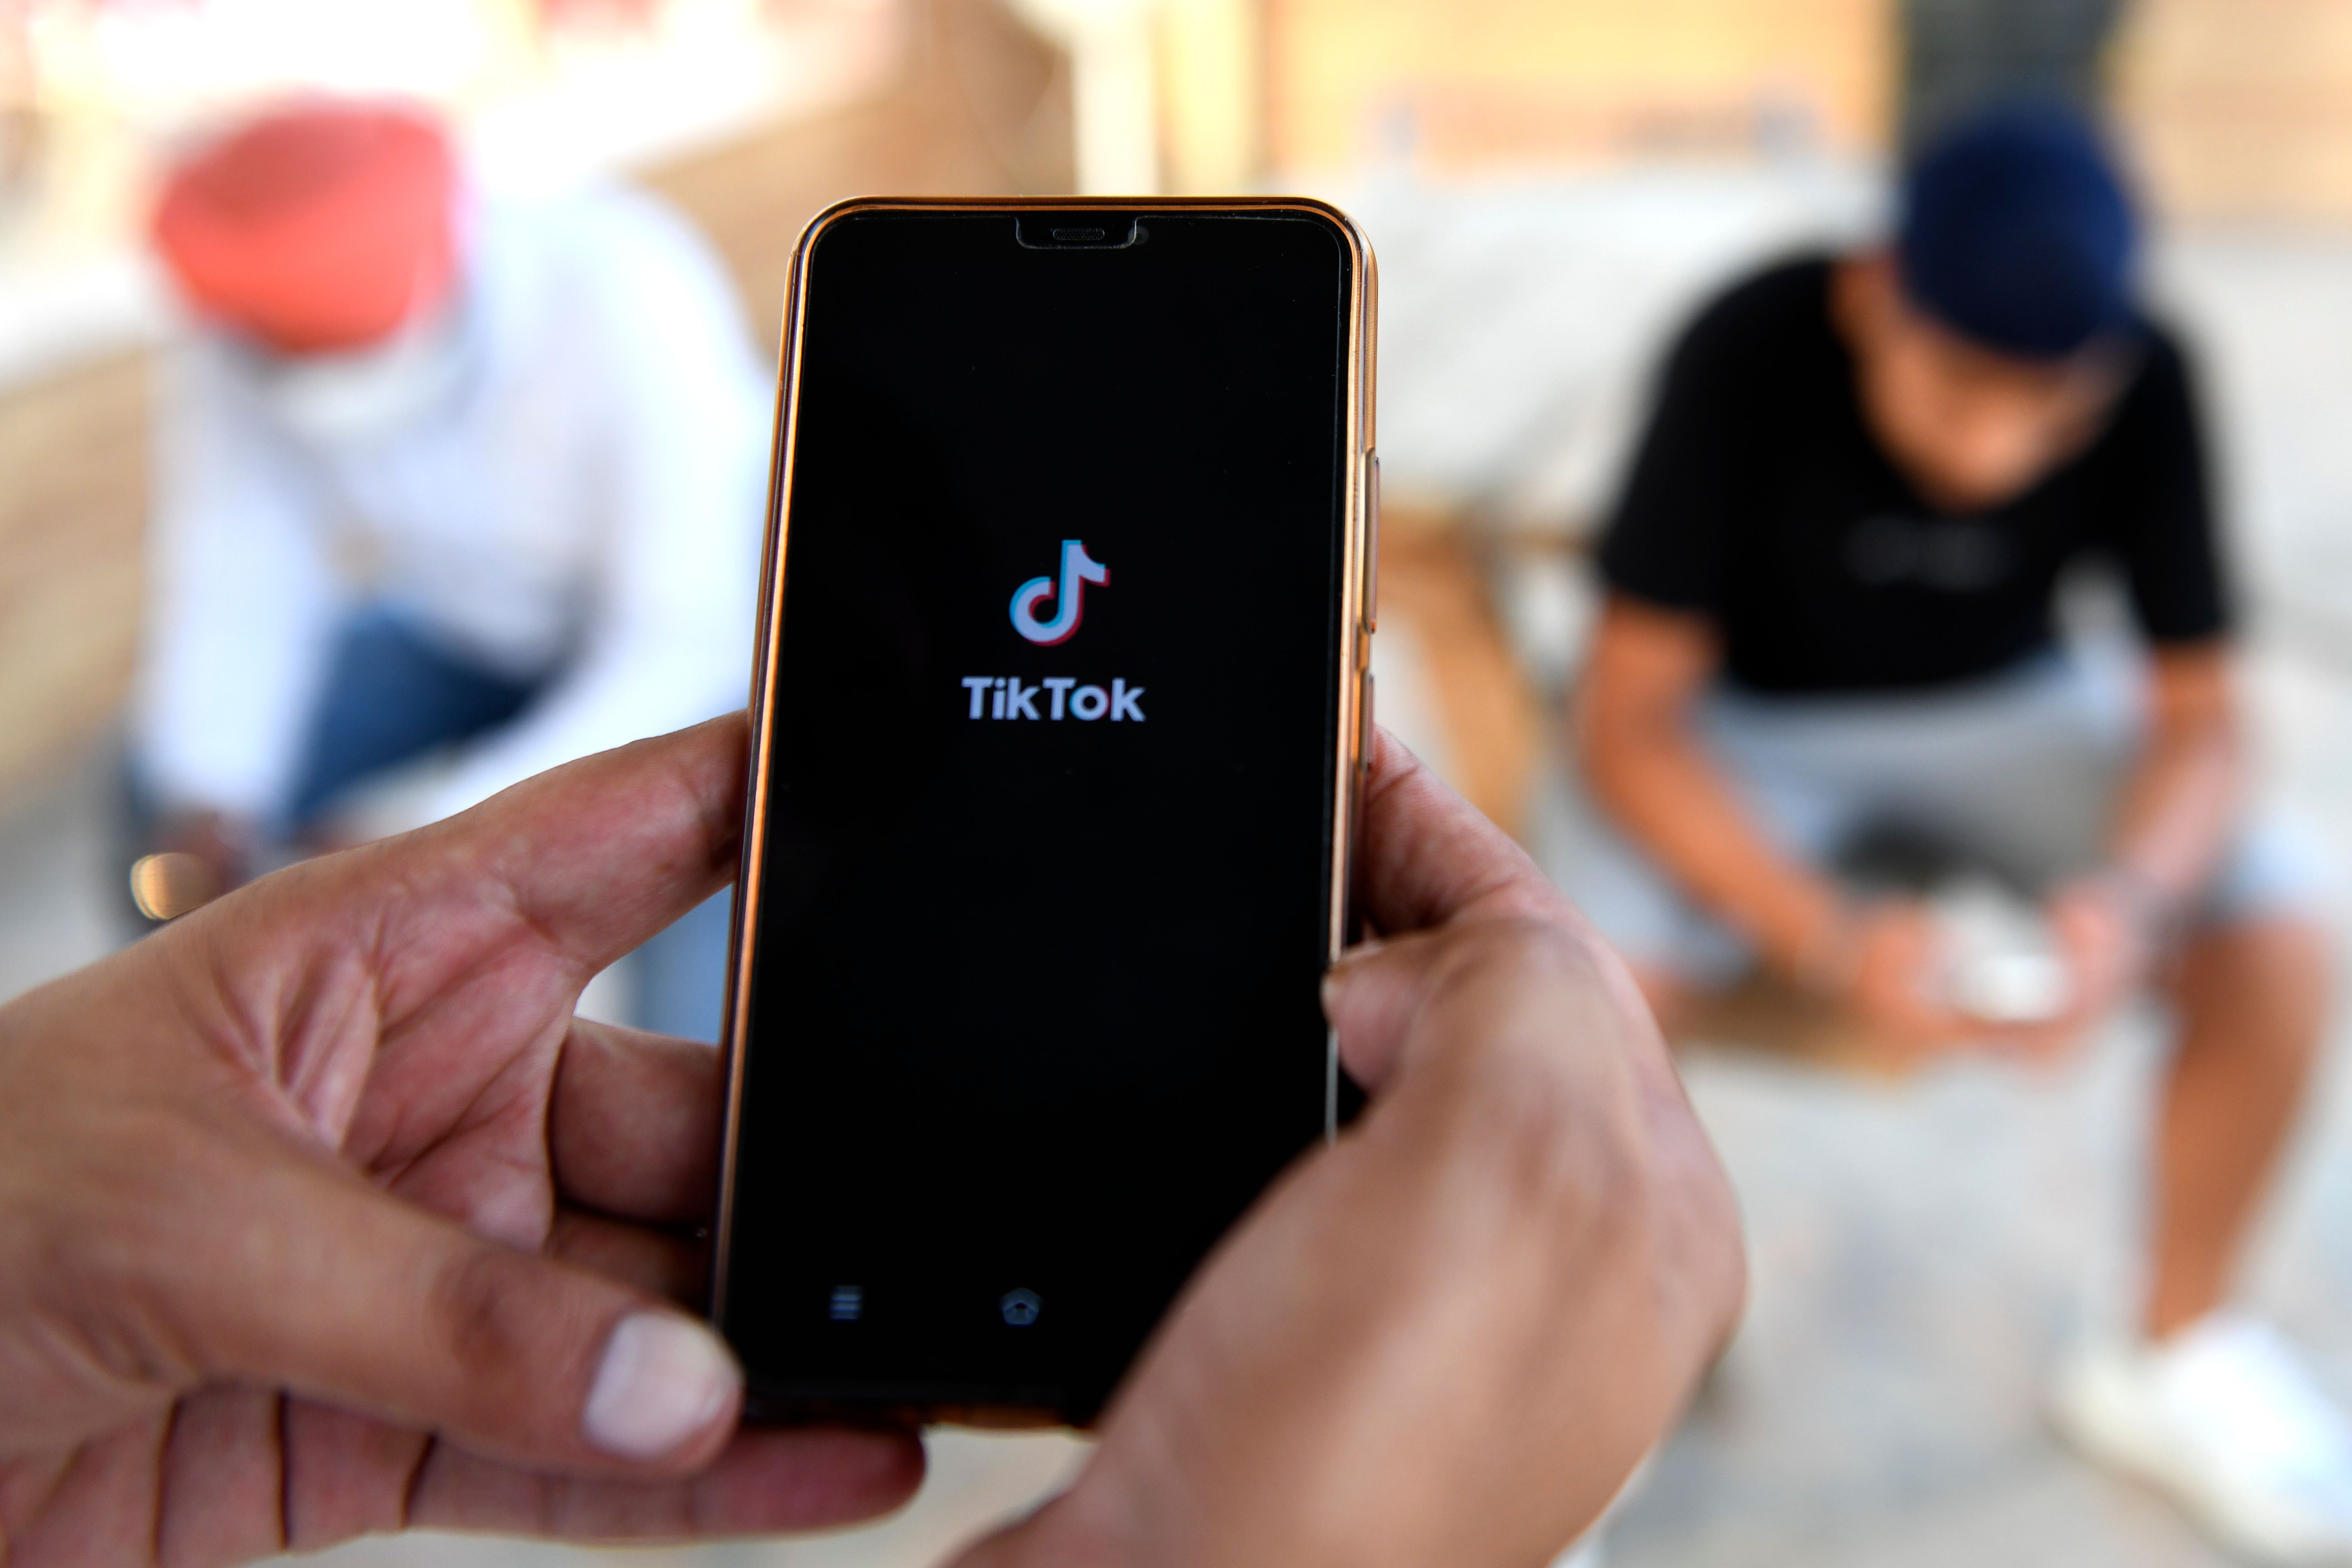 TikTok is Offering $100M in Ad Credits to Rebuild the Small Business Community